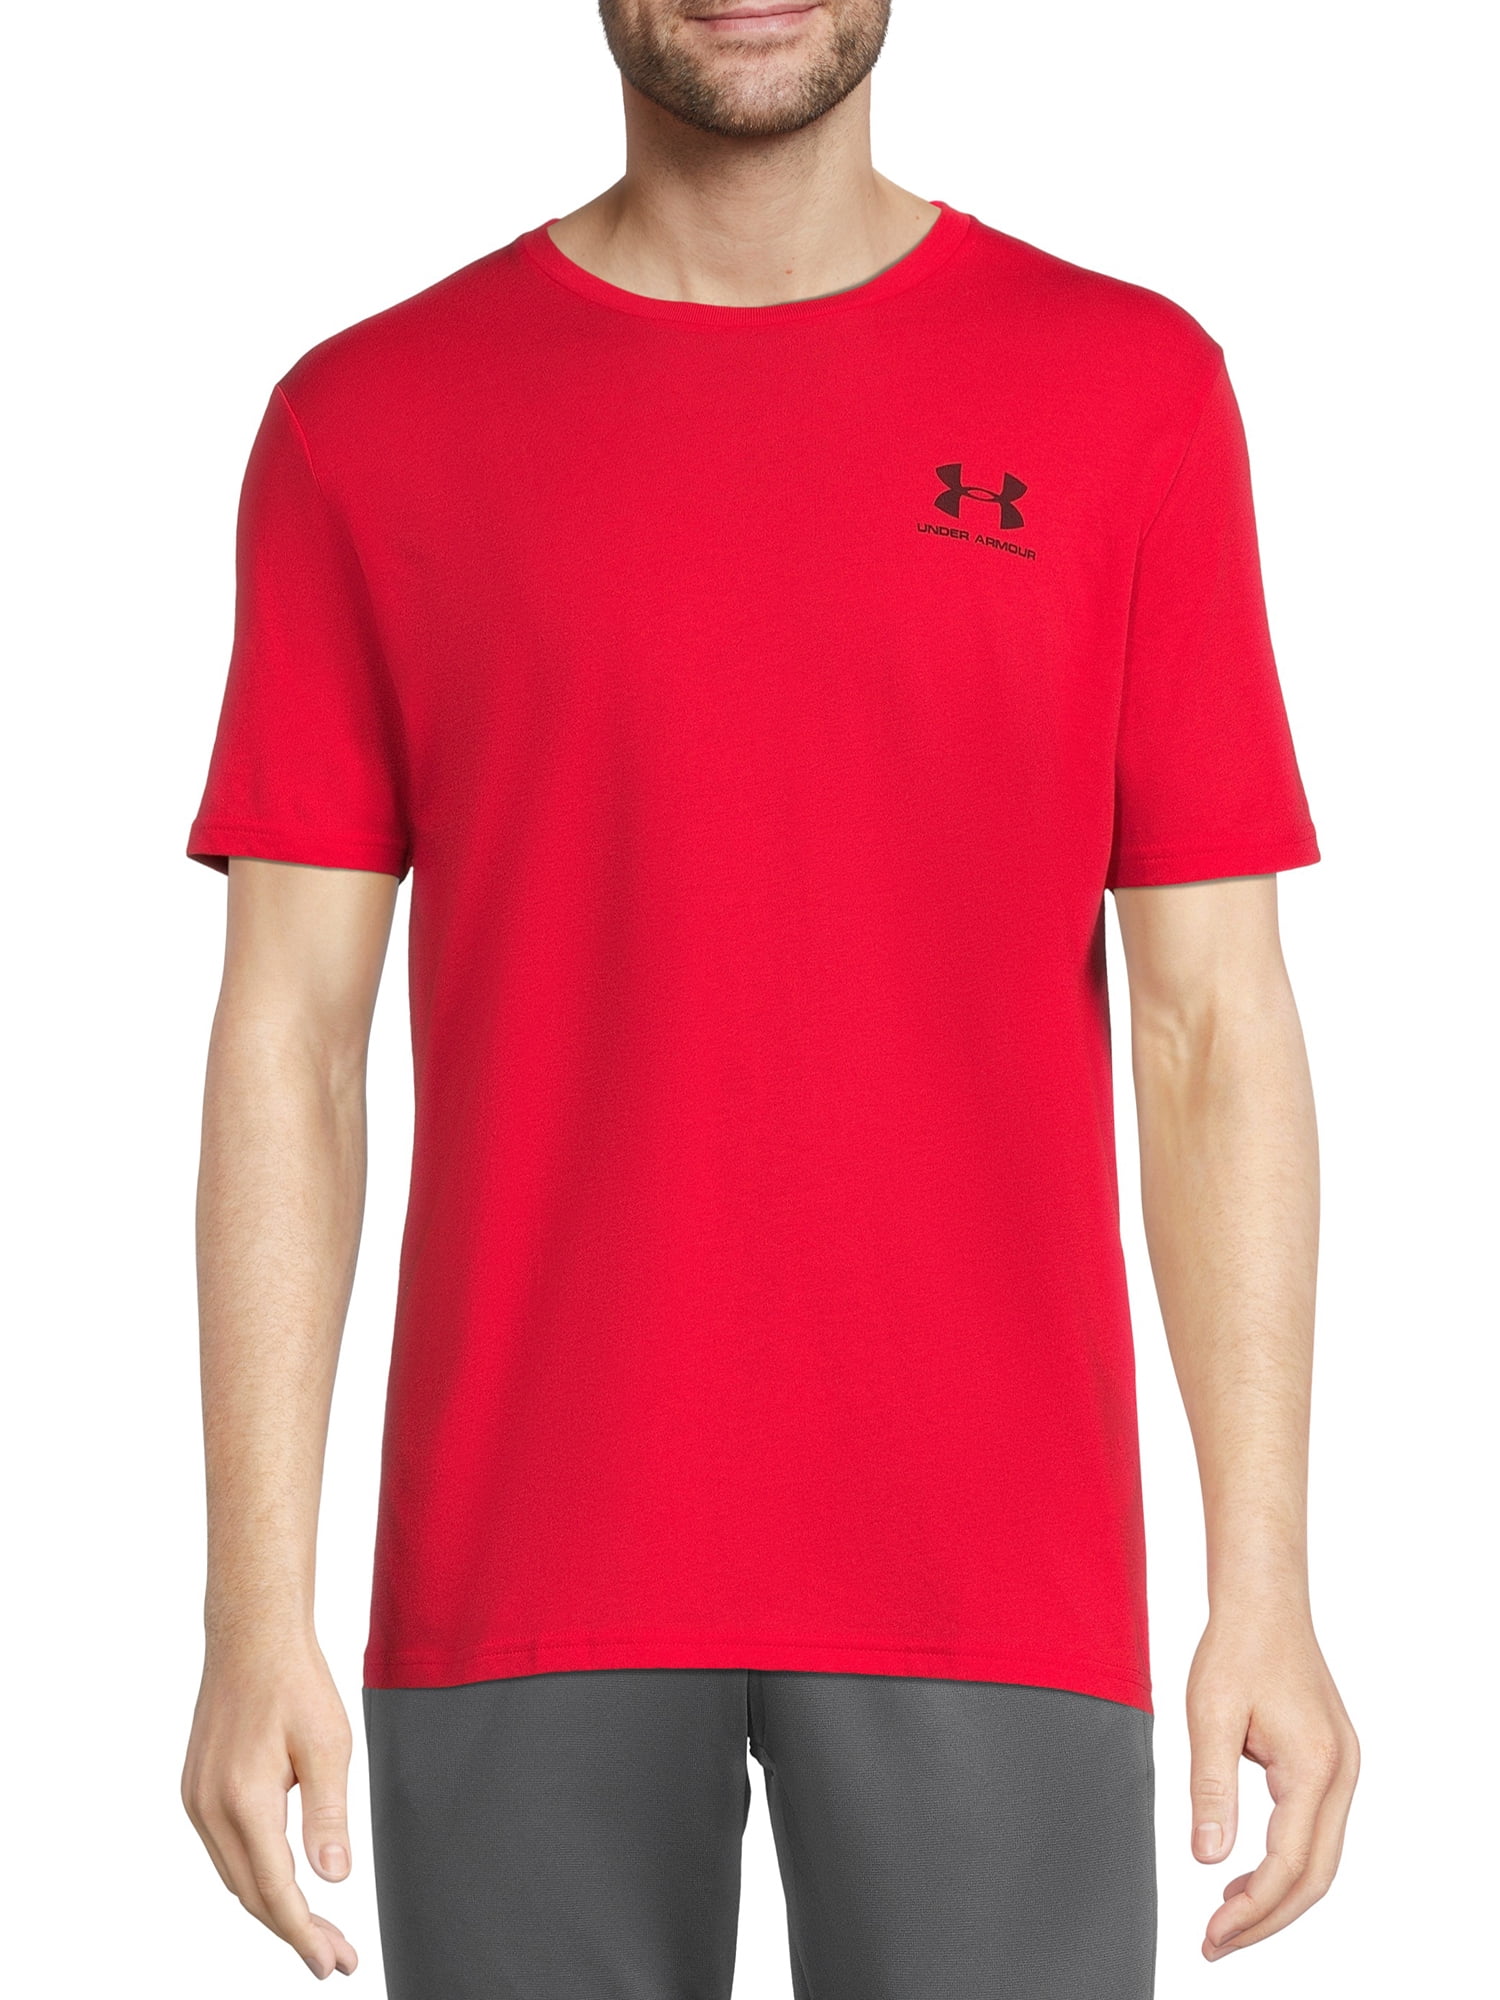 Under Armour Men's and Big Men's UA Sportstyle Left Chest Logo T-shirt,  Sizes up to 2XL 